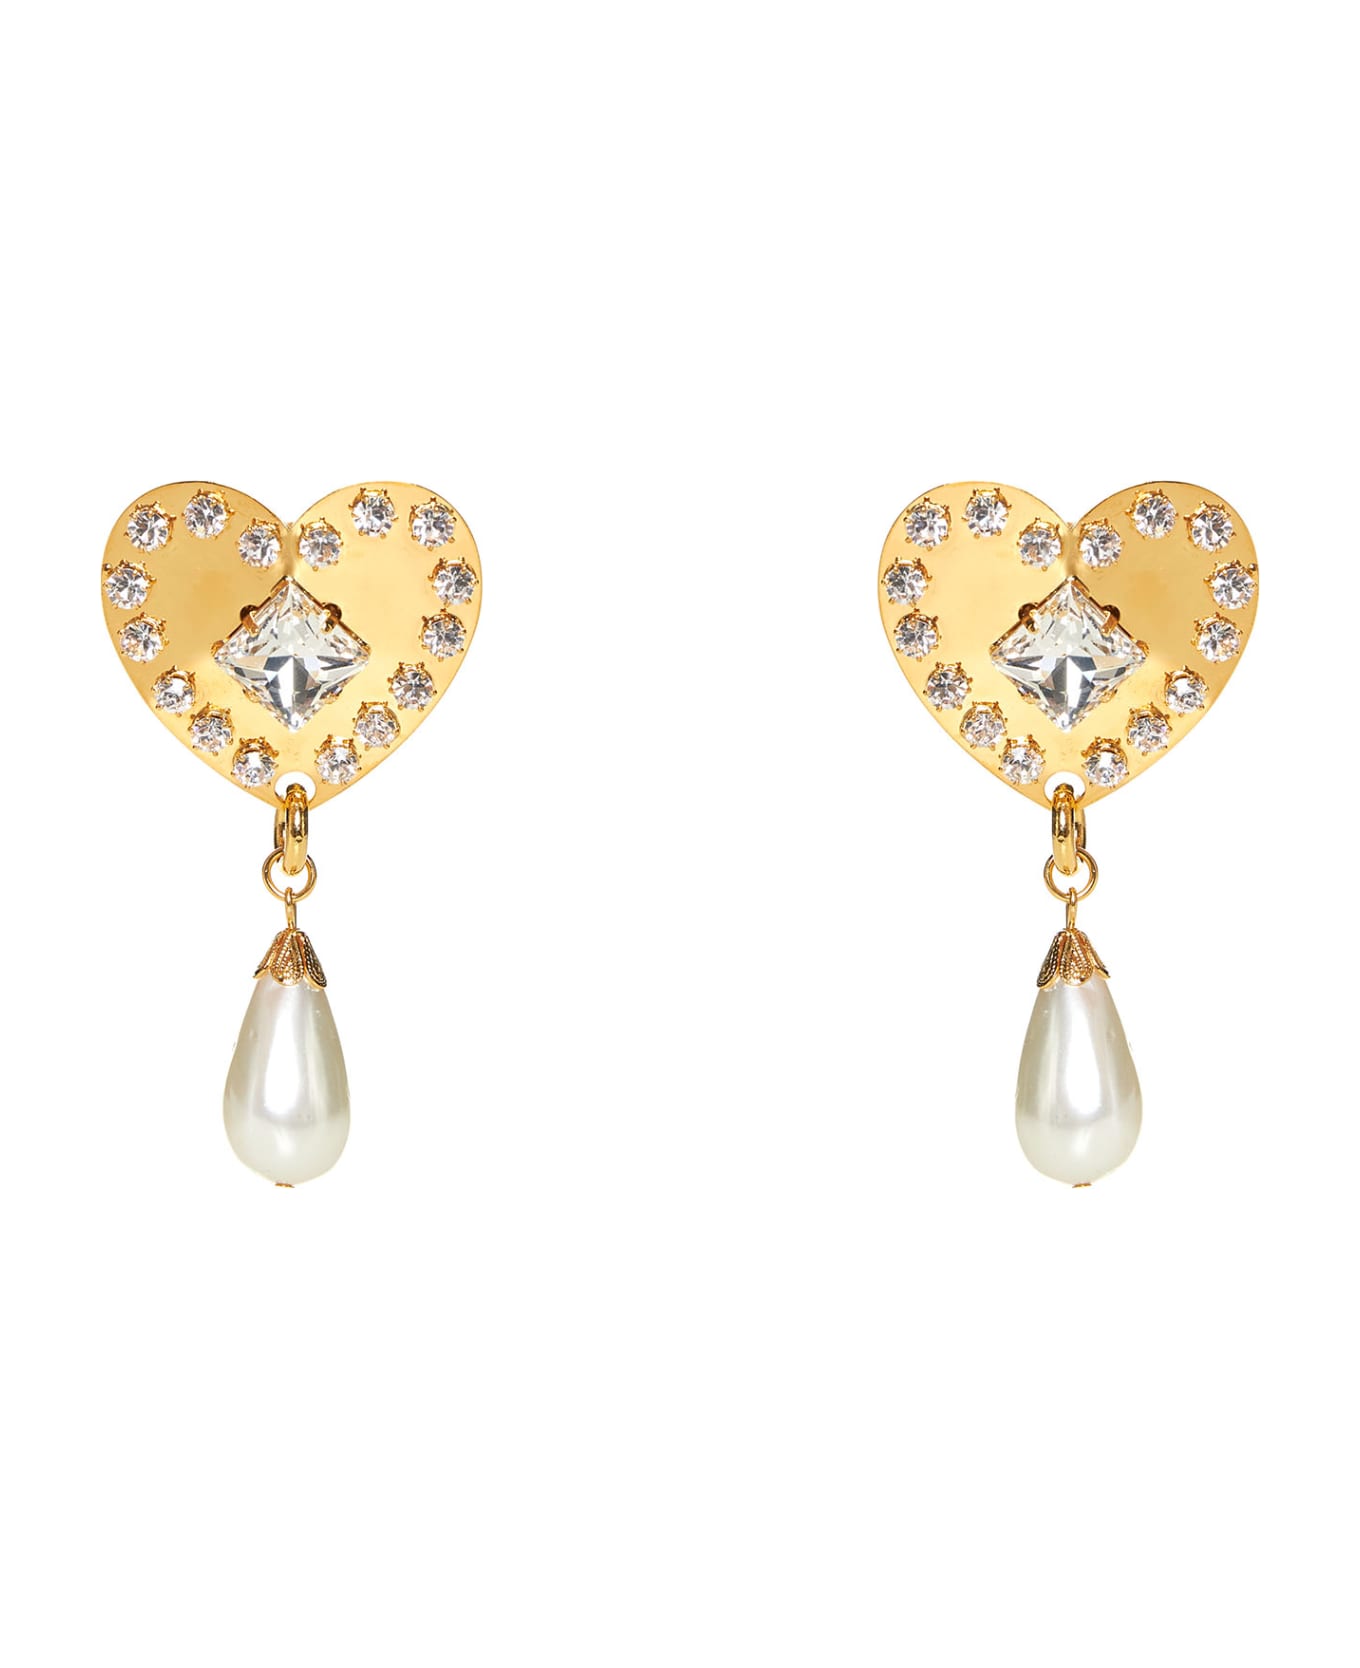 Alessandra Rich Earrings - Cry gold